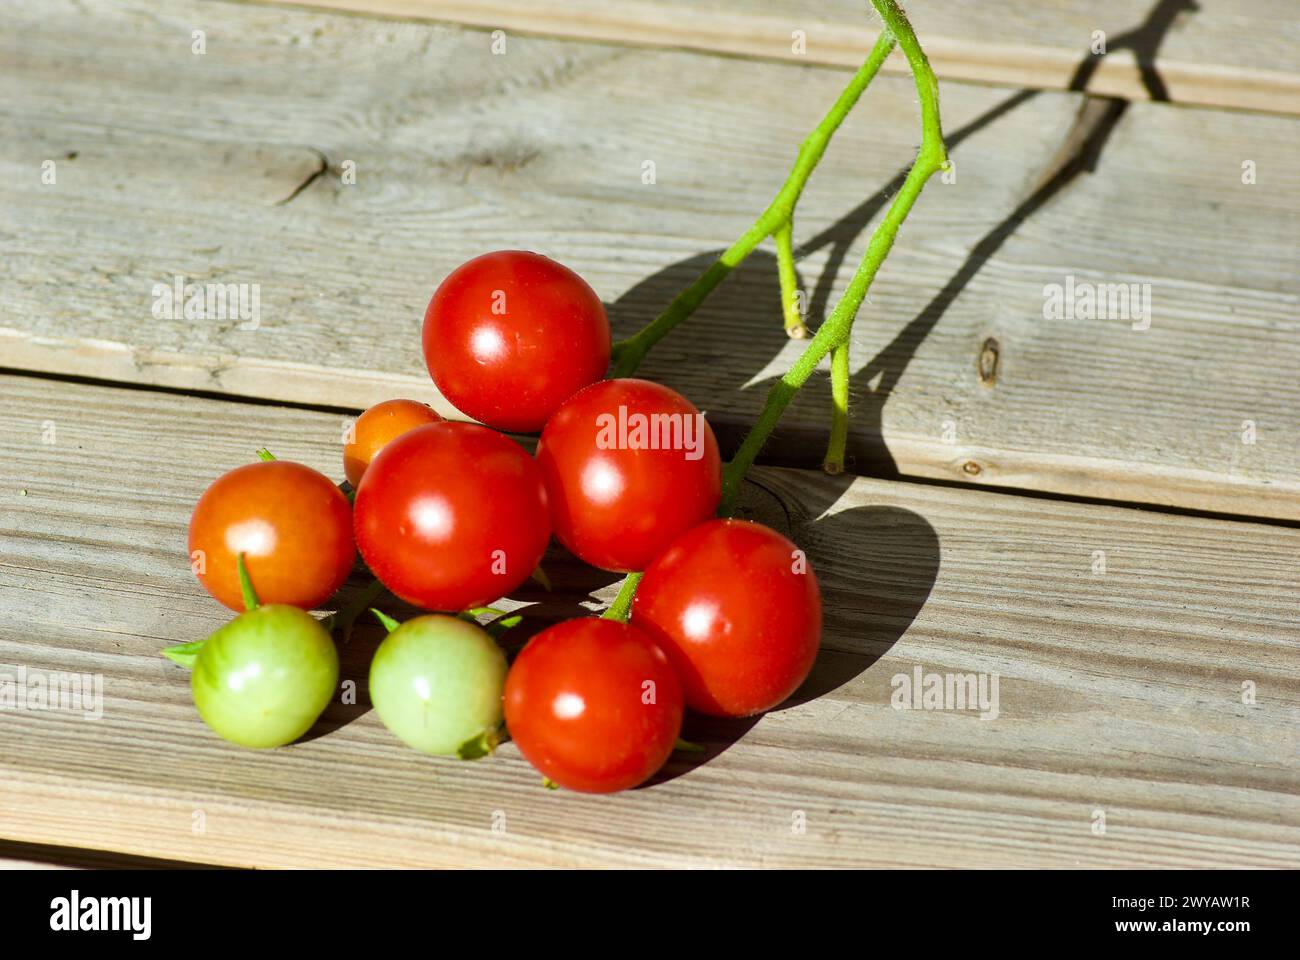 Cluster of ripe red organic cultivated tomatoes laying on wooden outdoor table in autumn. Stock Photo